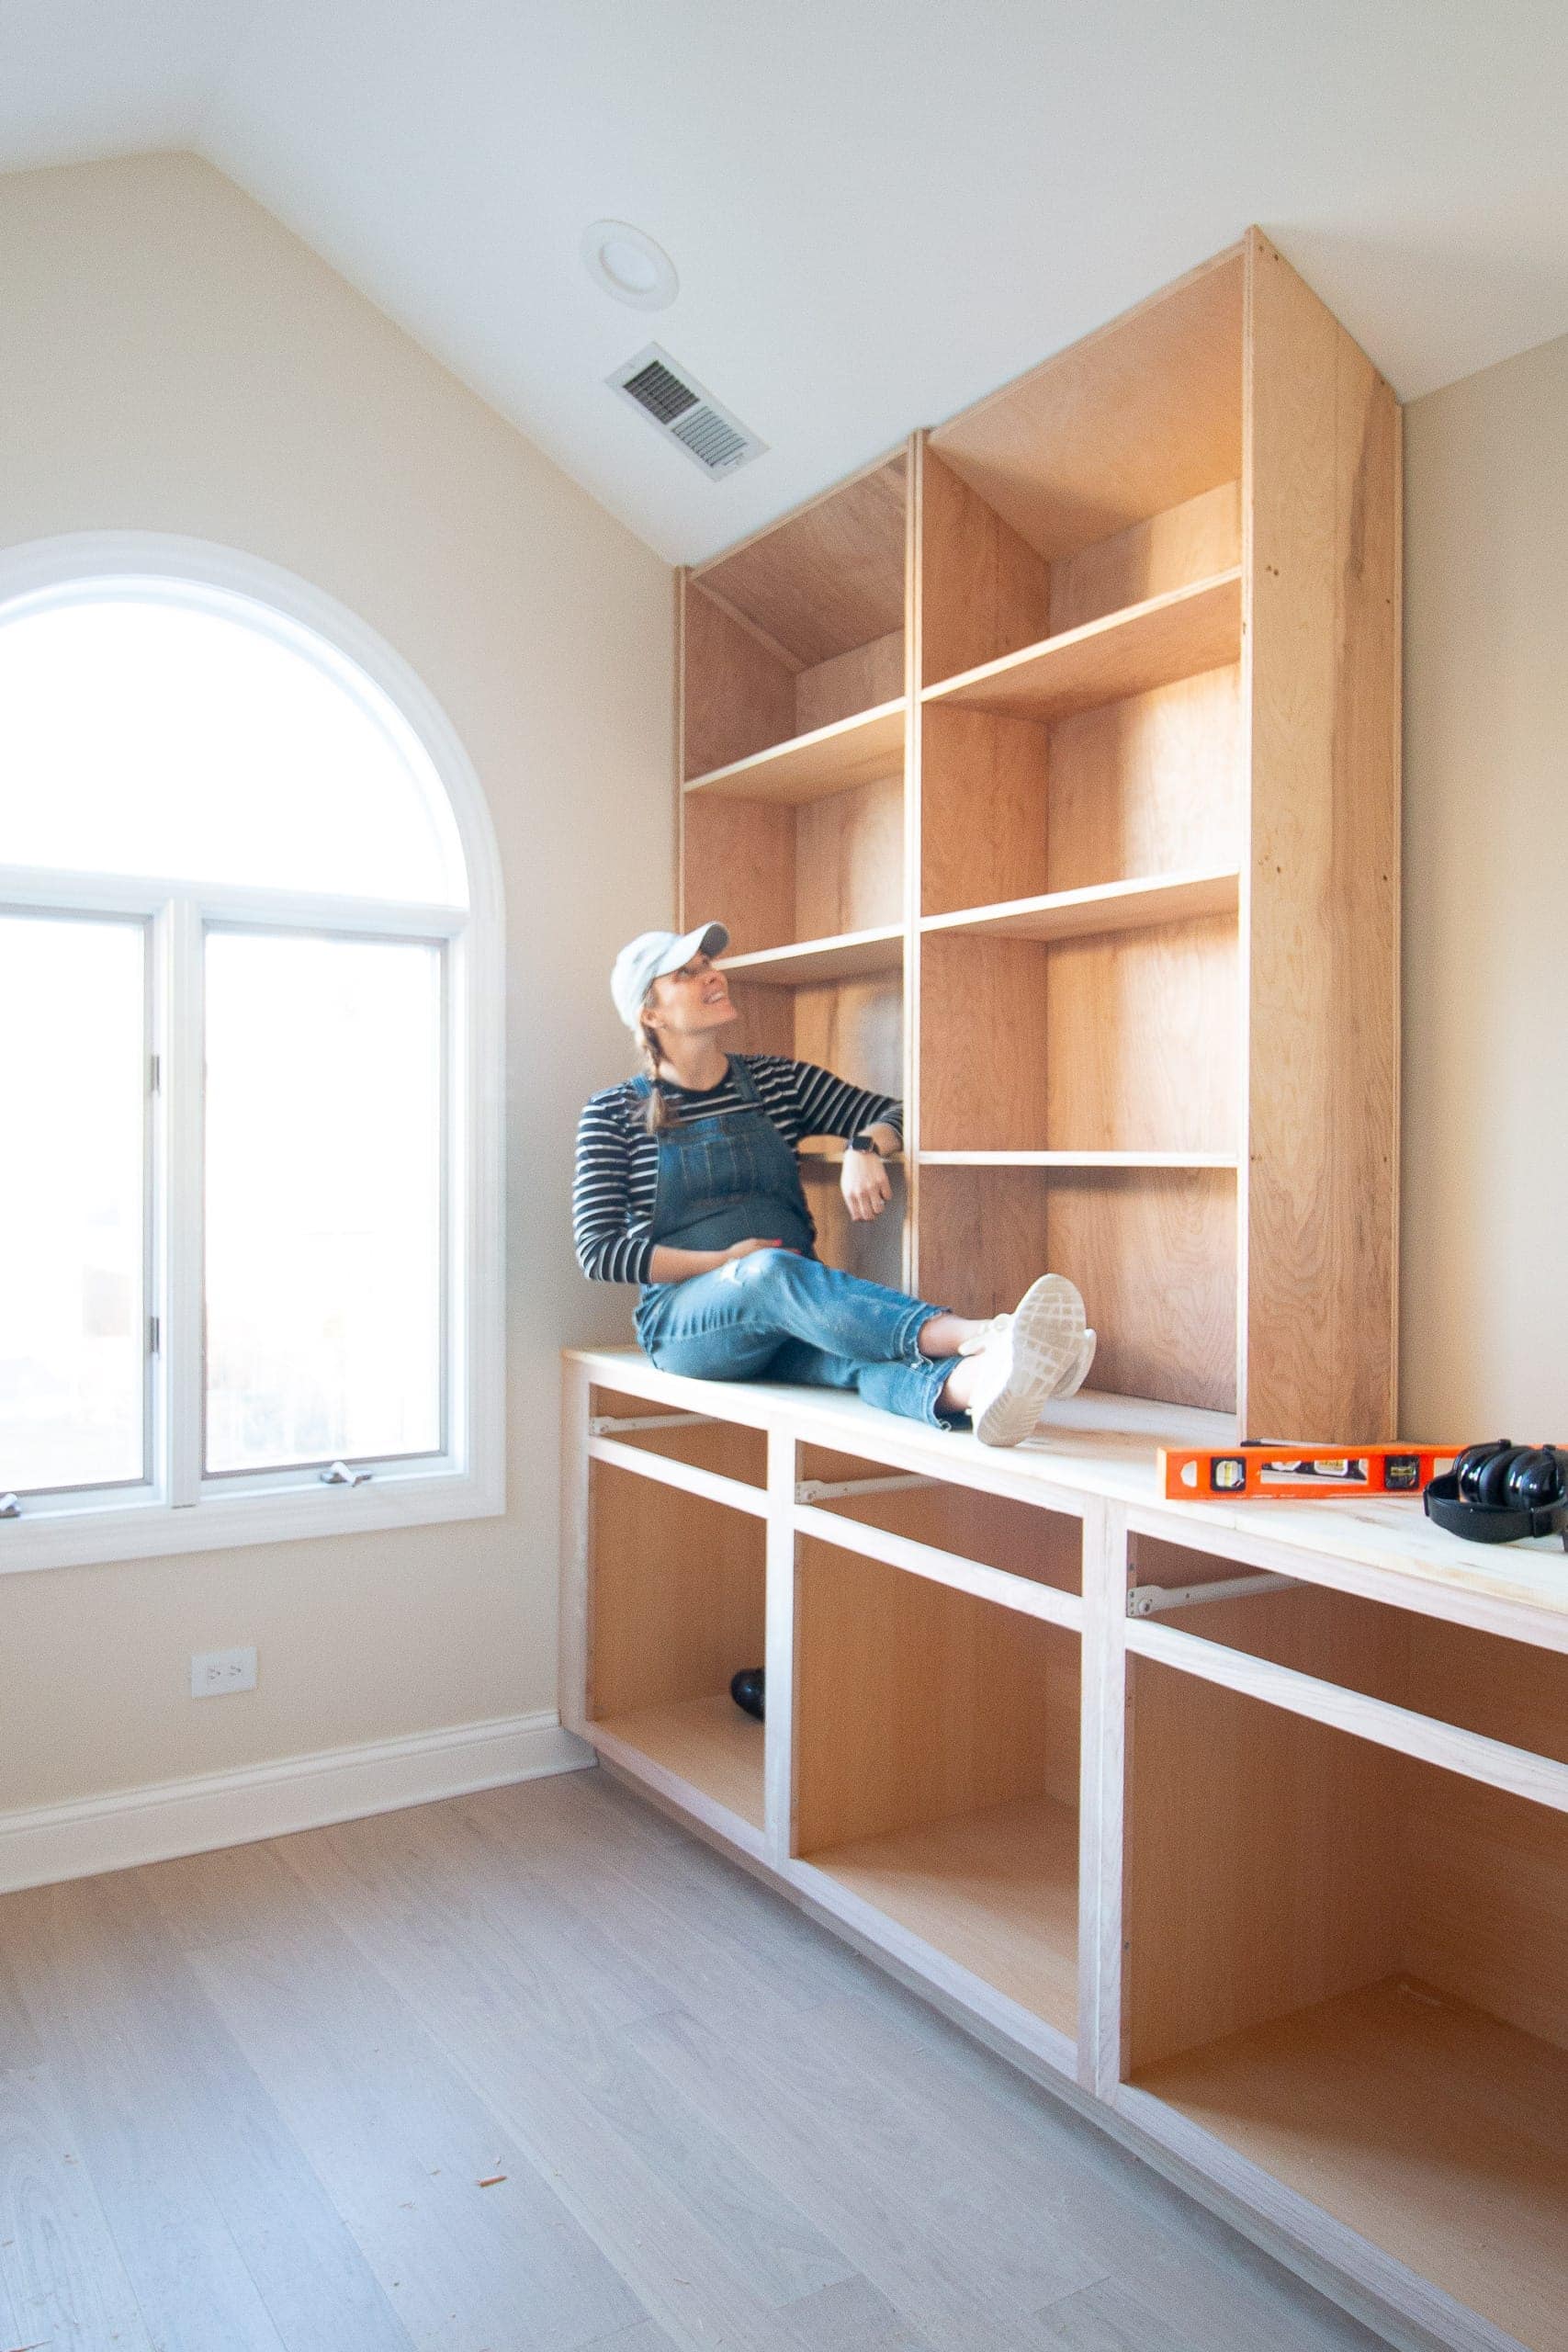 How To Build Diy Bookshelves For Built Ins The Playbook